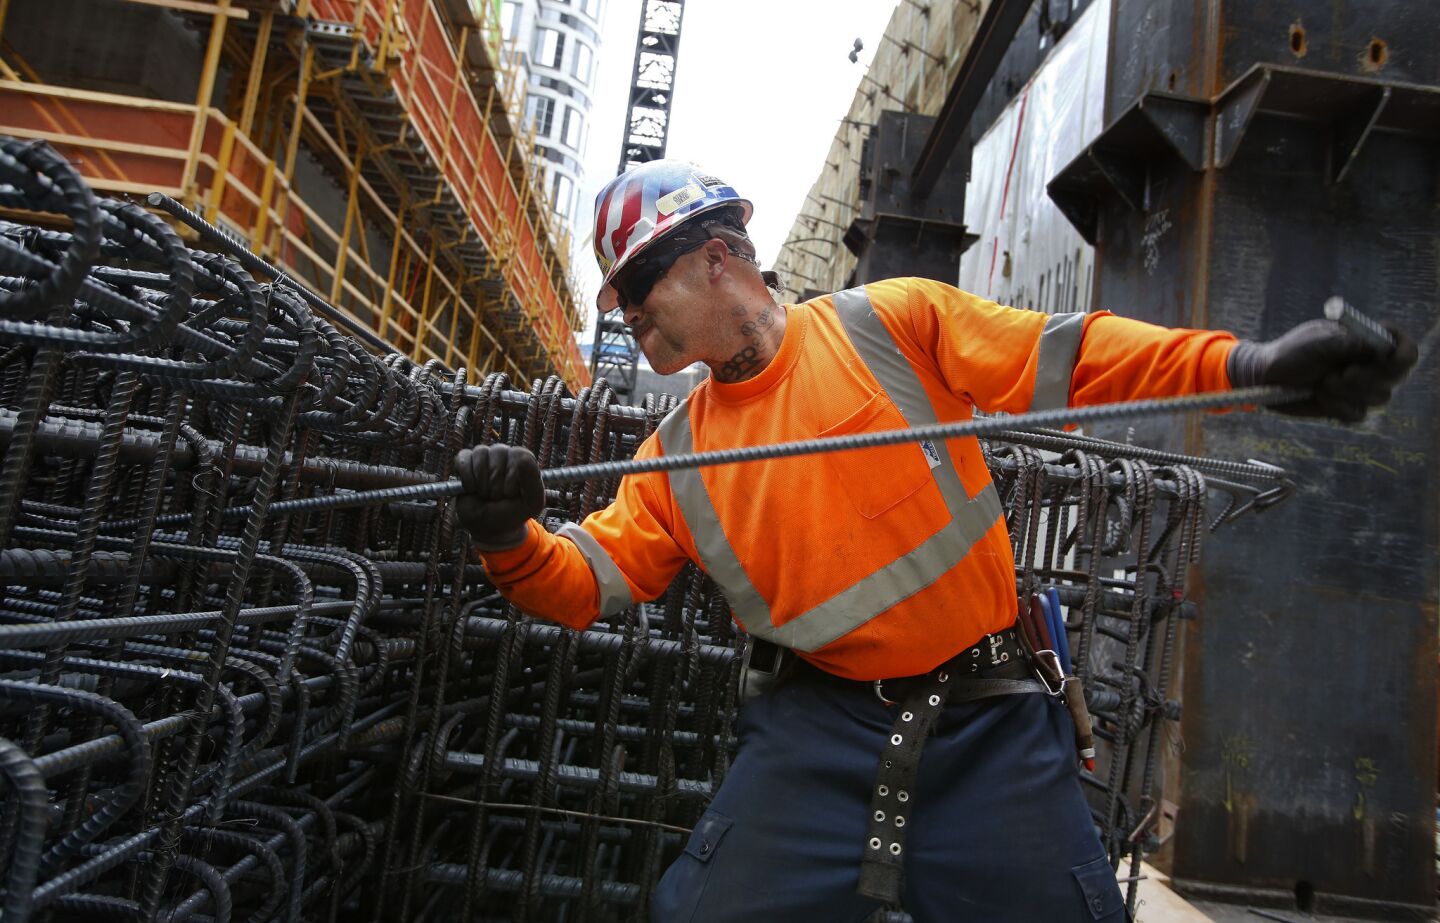 Ironworker Joseph Voll tightens rebar during construction of the 1,100-foot-tall Wilshire Grand tower. It will be the tallest structure west of Chicago, its developers say.